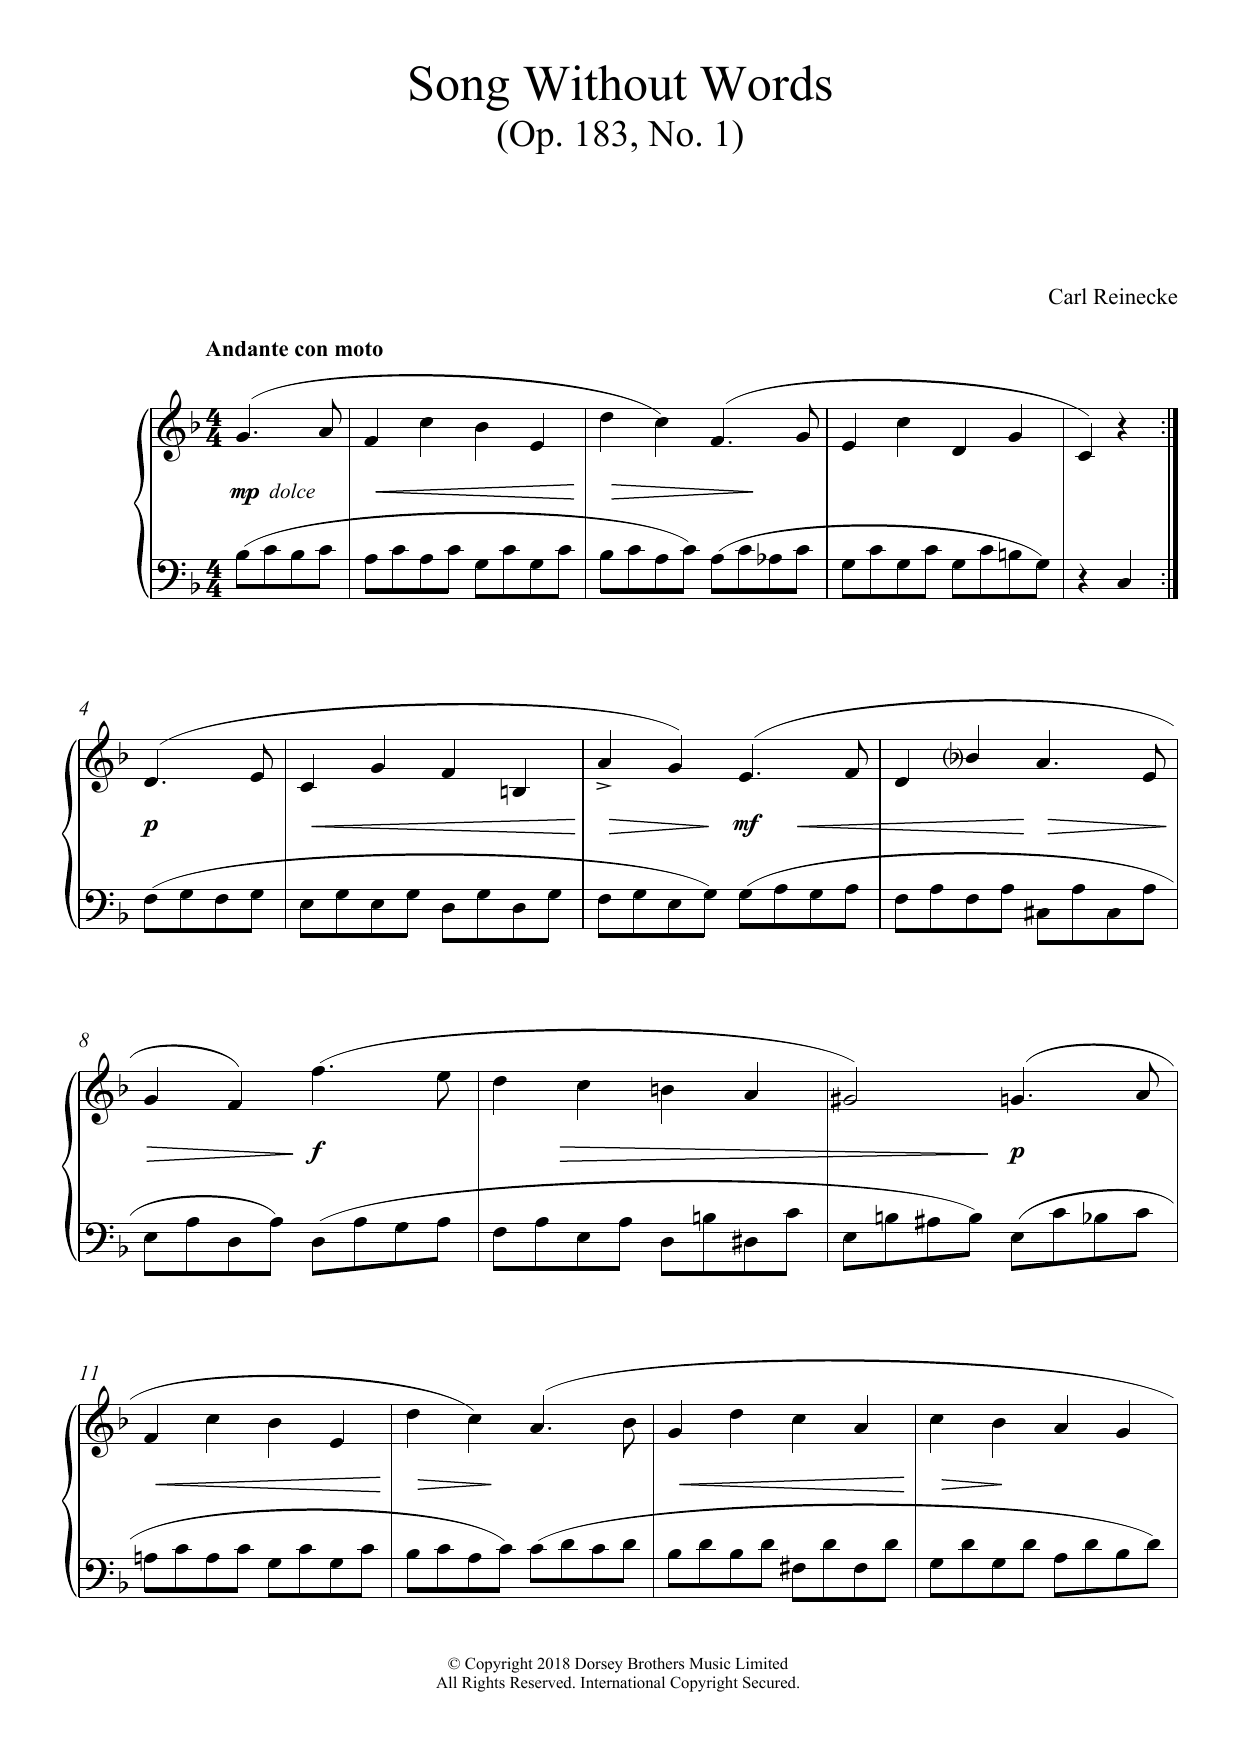 Download Carl Reinecke Song Without Words, Op. 183, No. 1 Sheet Music